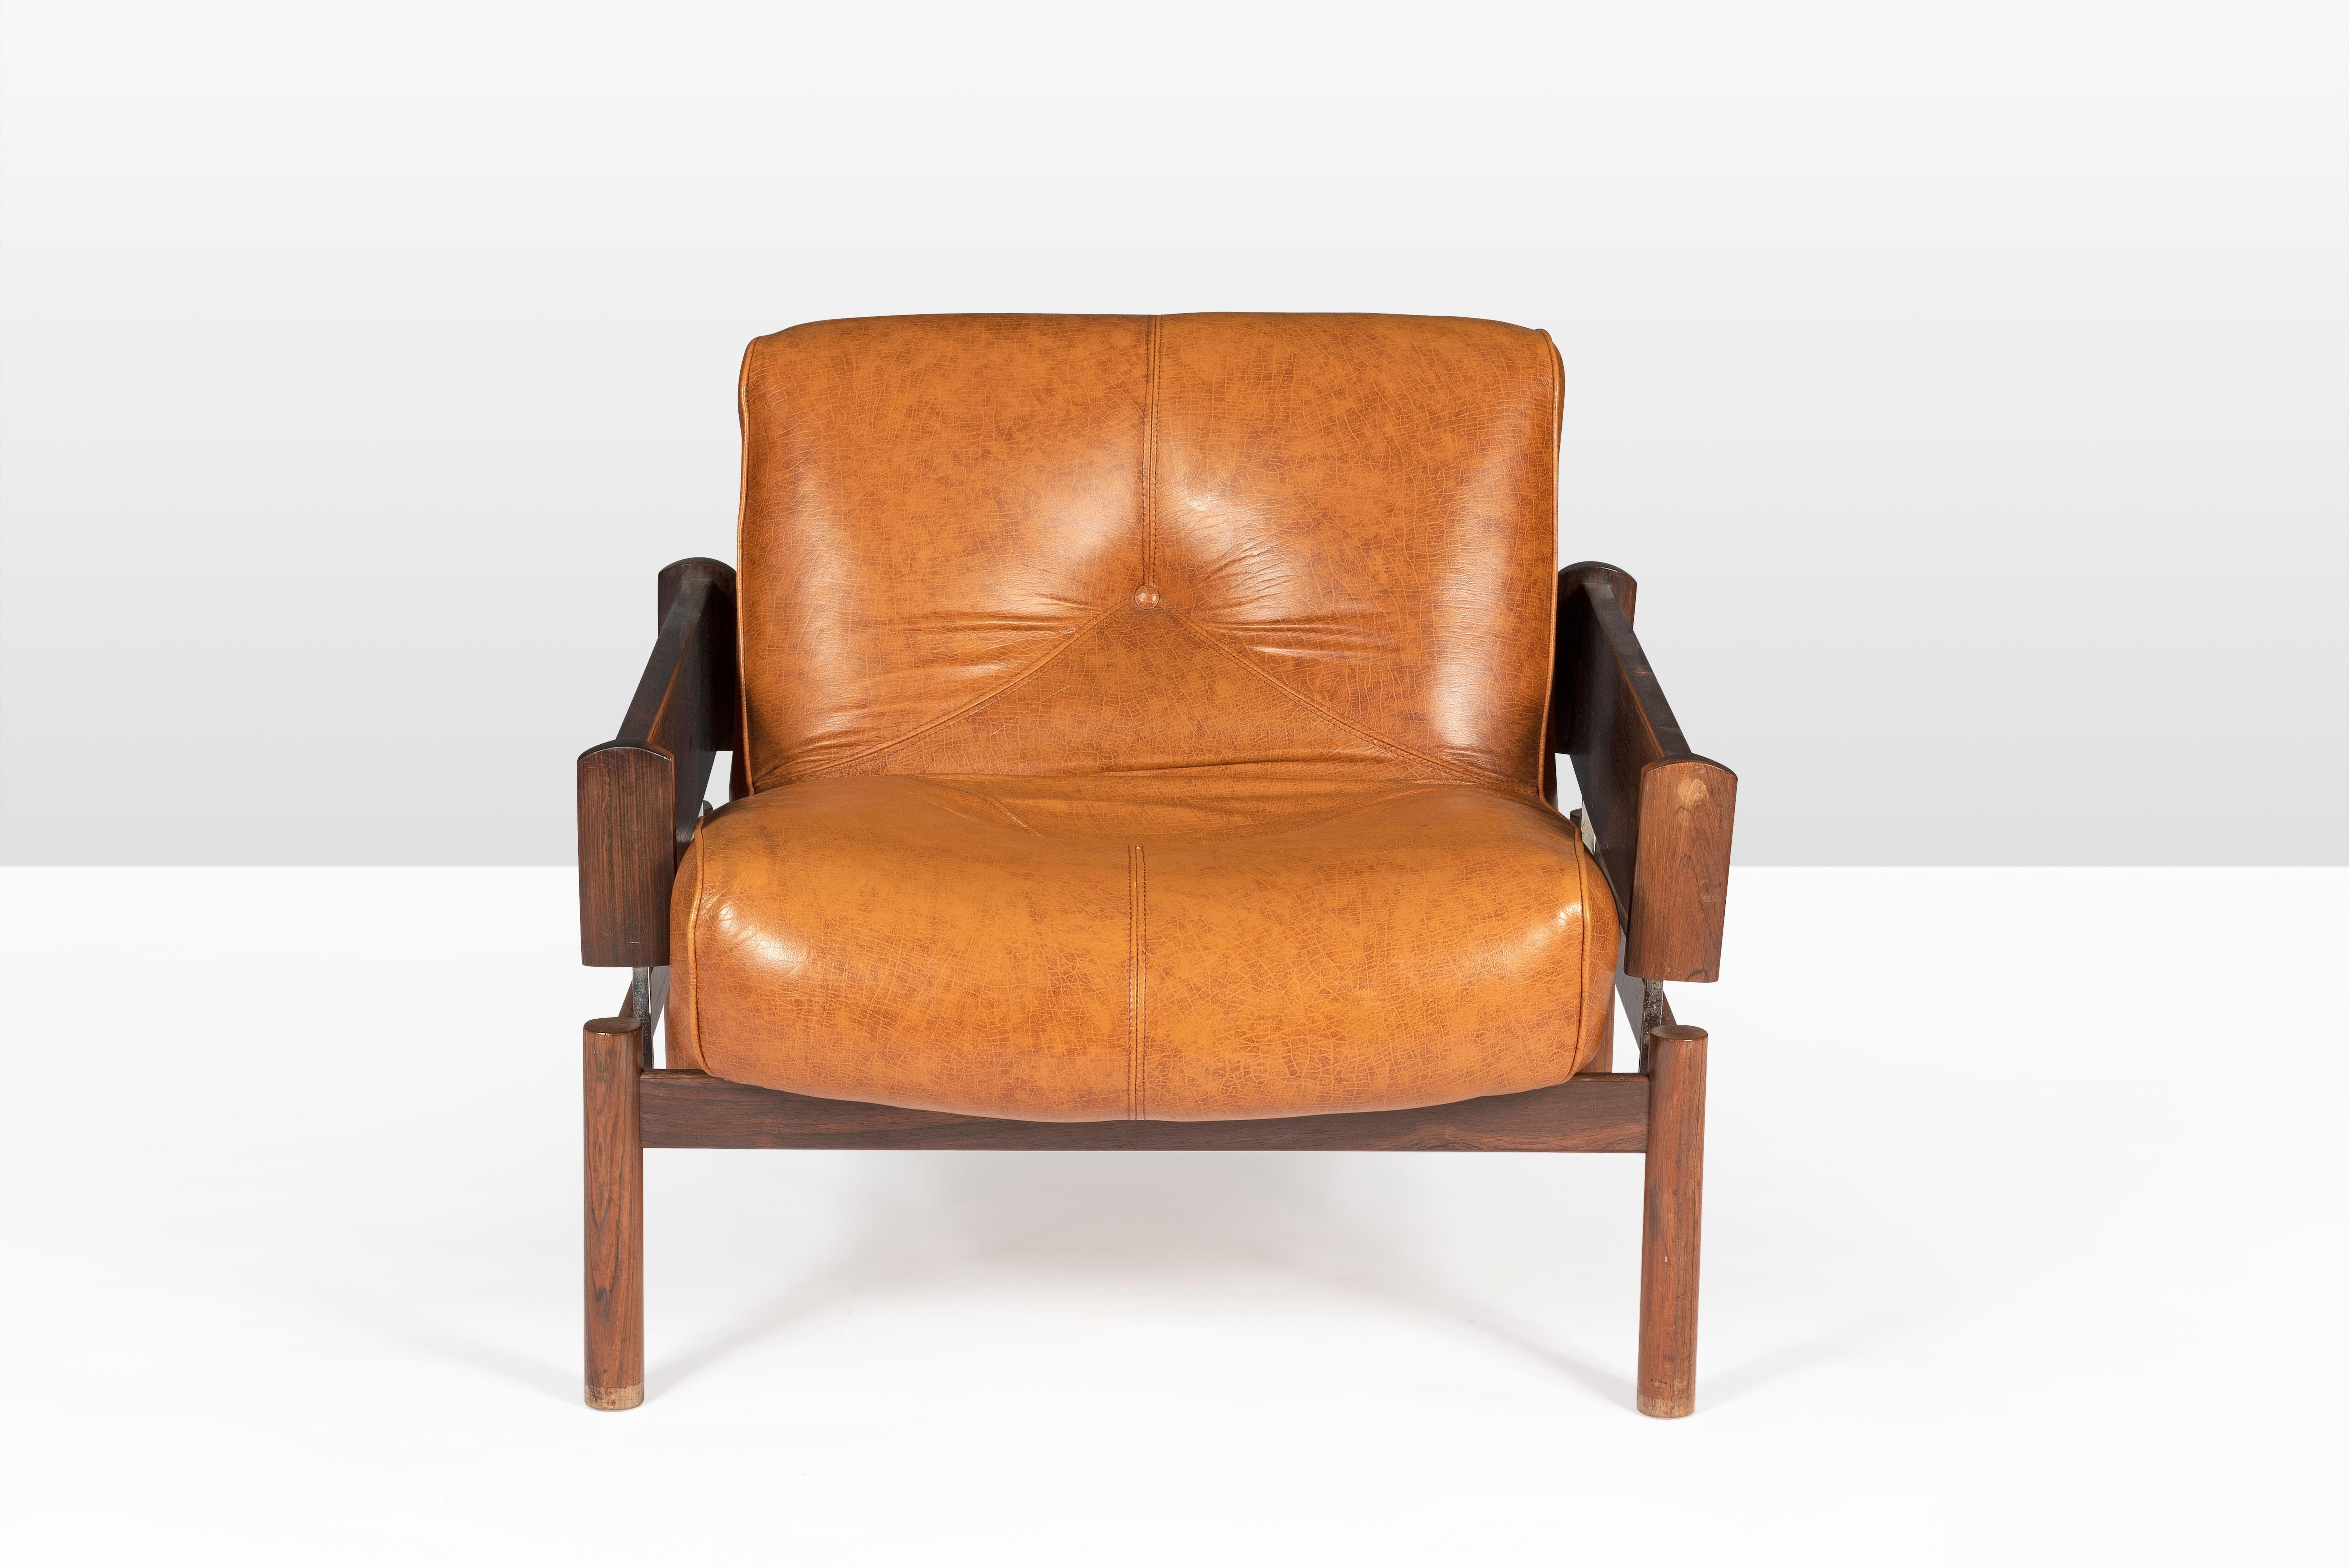 Percival Lafer super comfortable Mid-Century Modern lounge chairs made of Brazilian mahogany and still with it's original faux leather upholstery.  Seating height is 41 cm. 